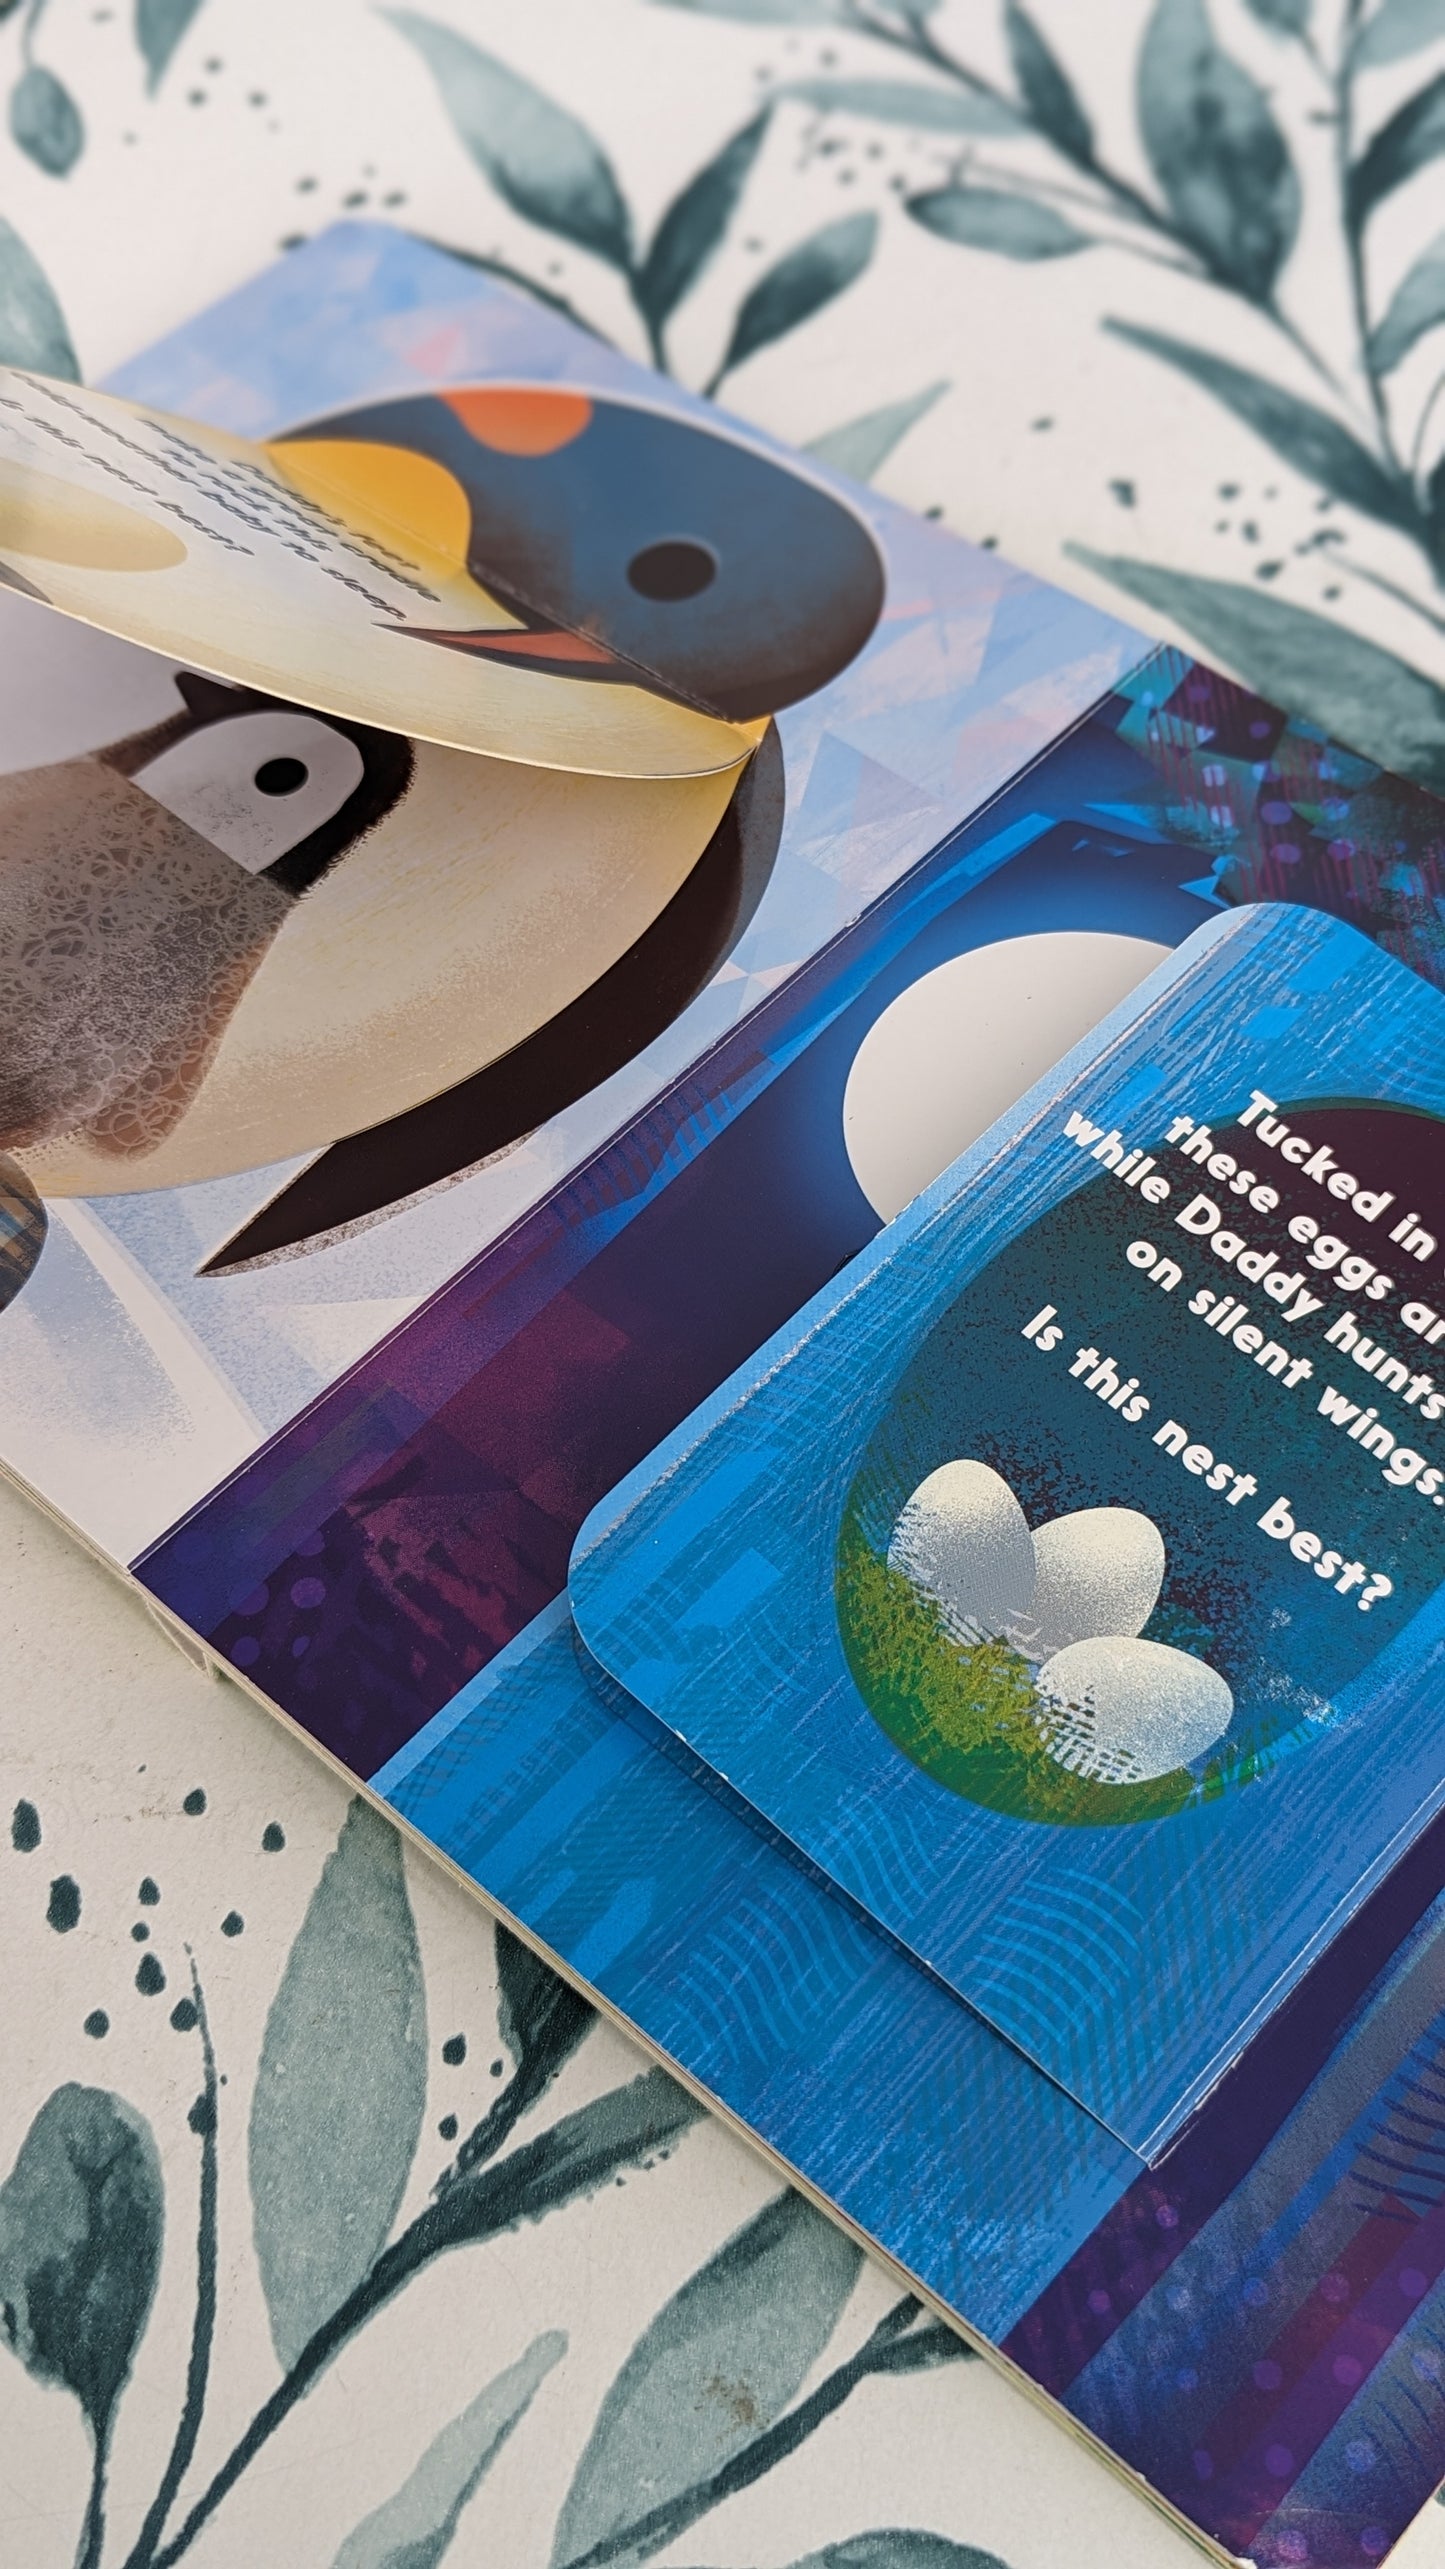 Whose Nest is Best? A Lift-the-Flap Book